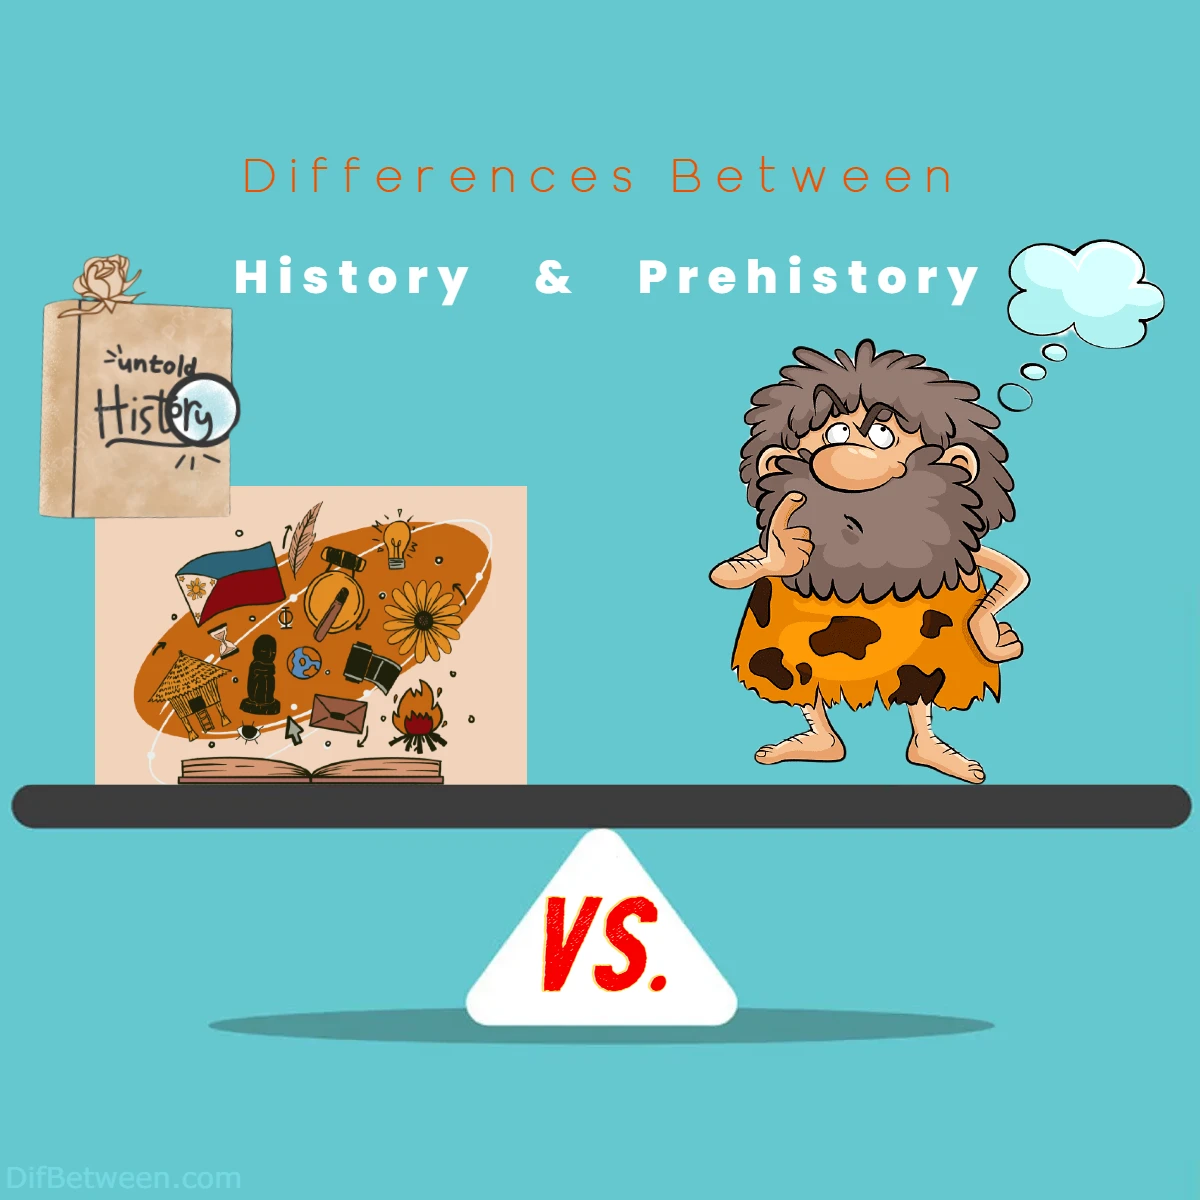 Differences Between History vs Prehistory